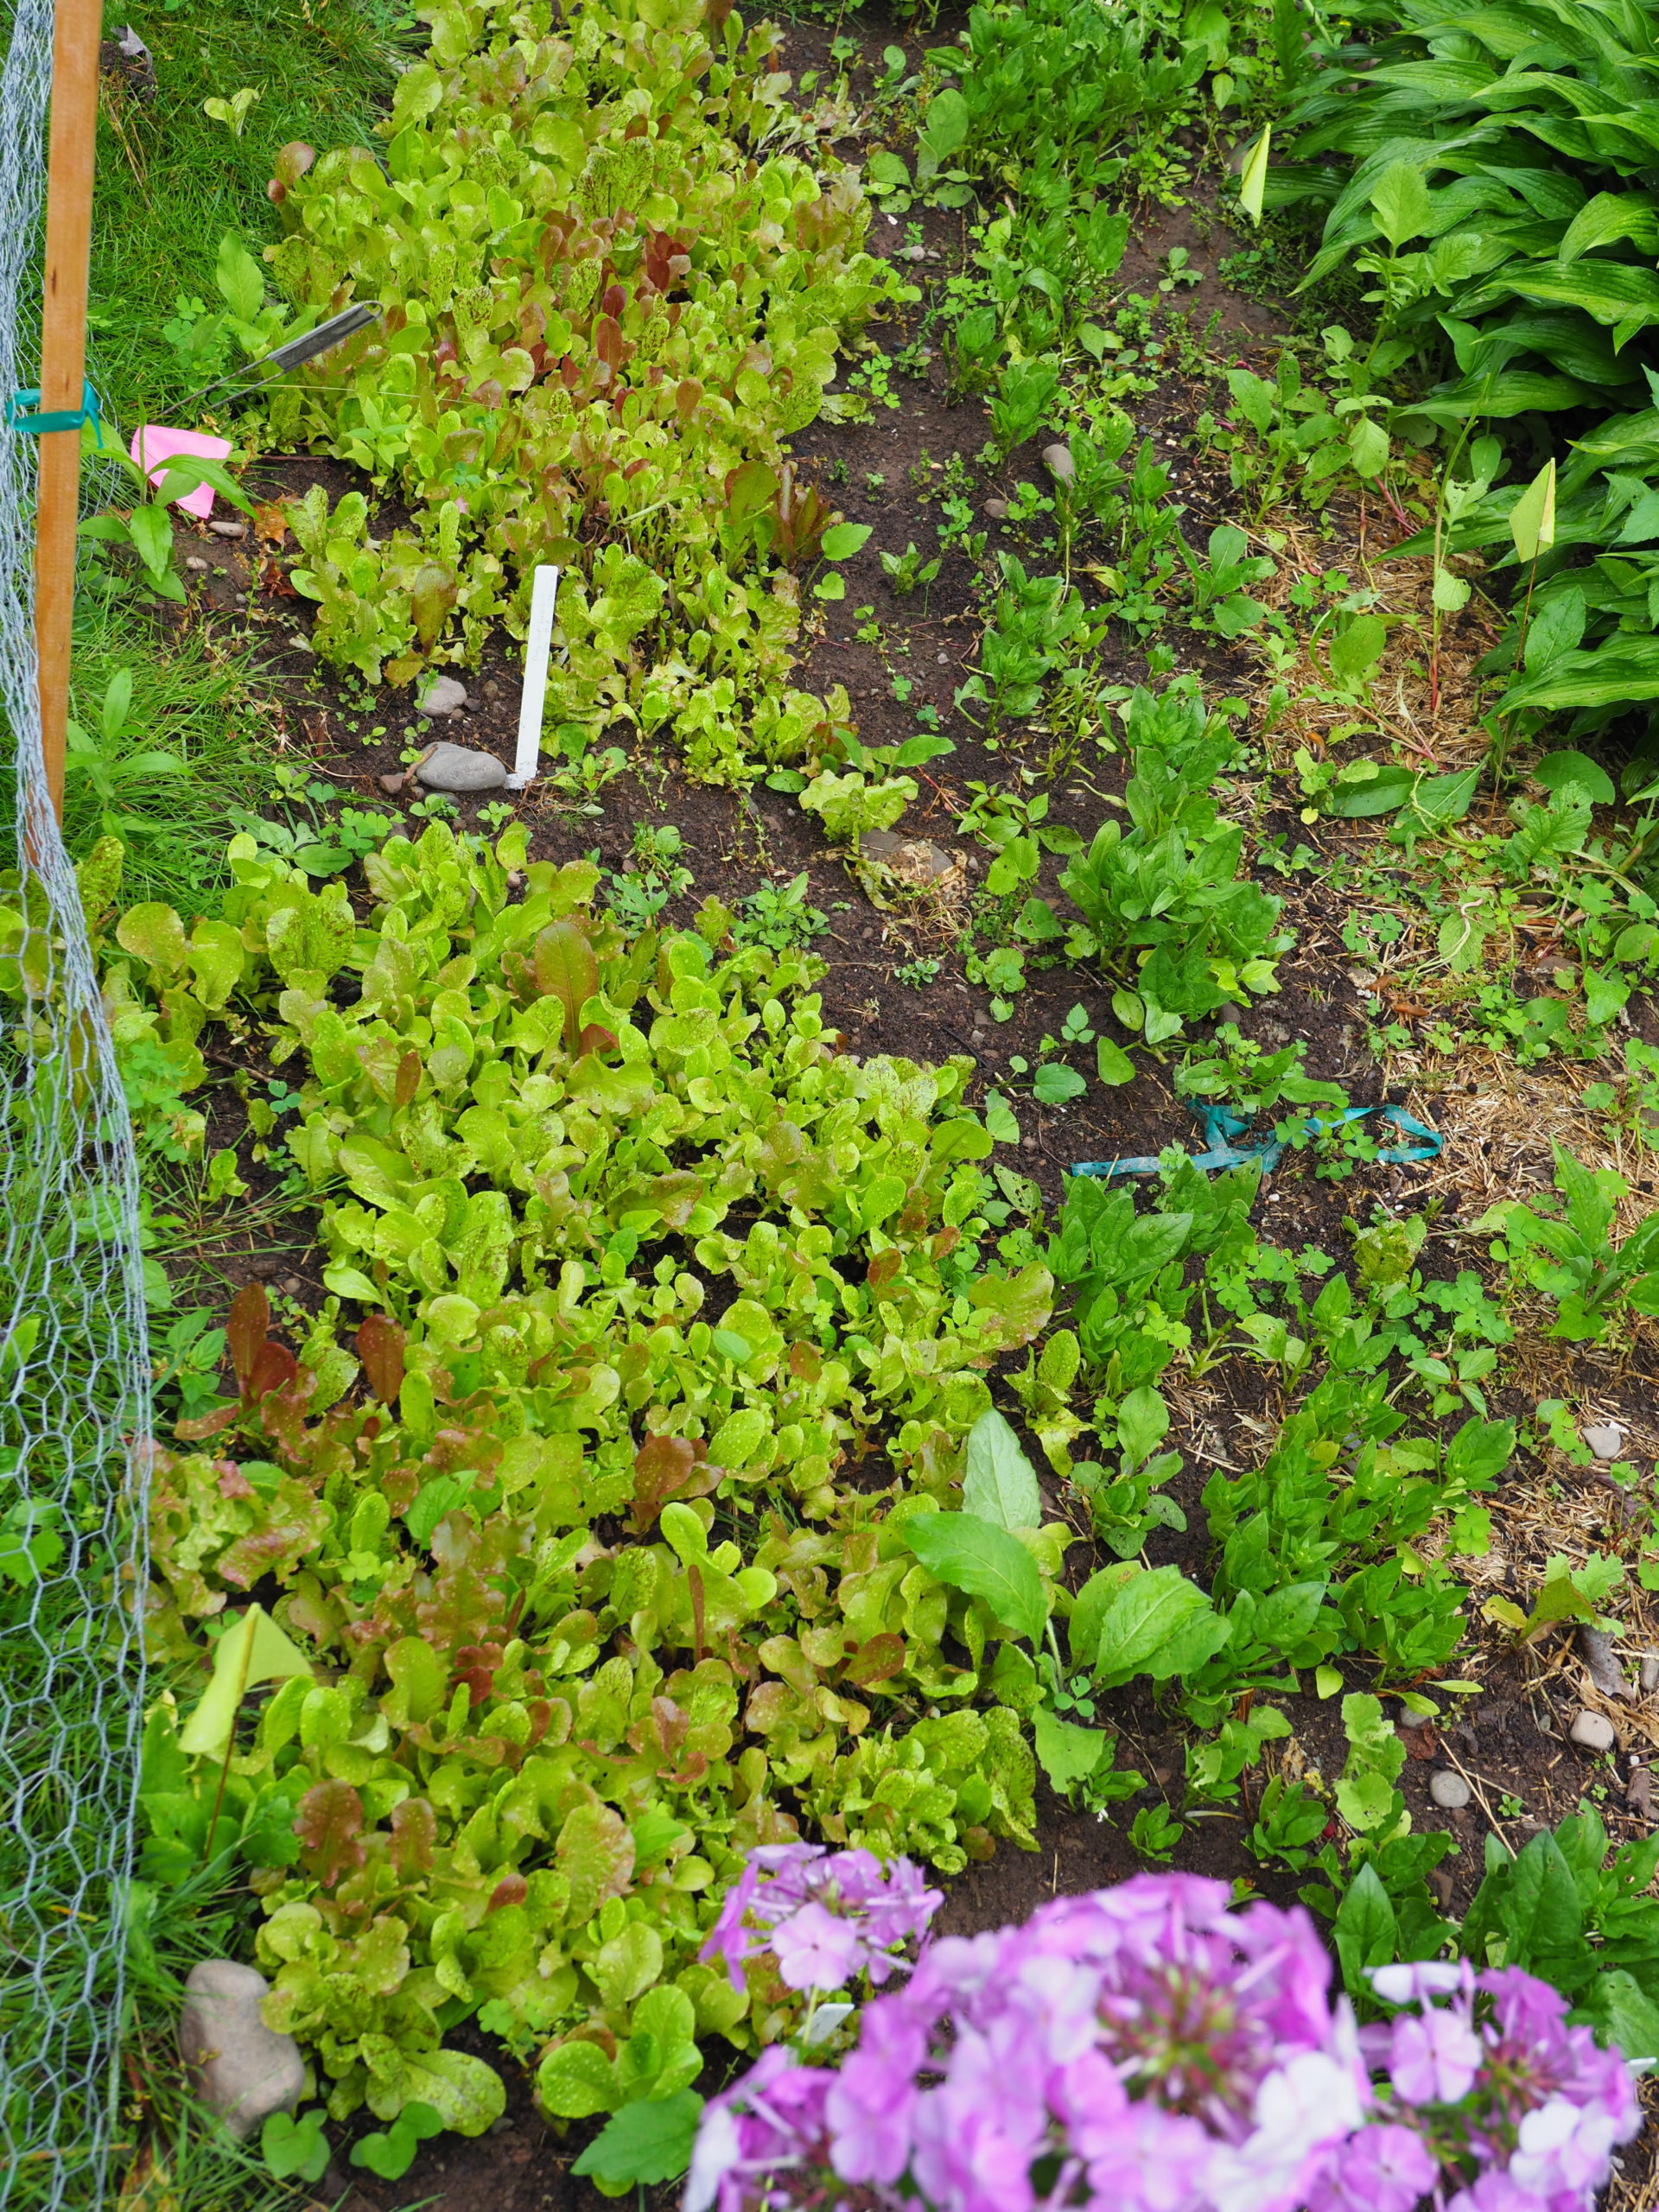 The two baby lettuce plots planted a month apart are on the left. The two plots of less than 15 square feet supply enough salad greens for two people for up to 12 weeks. 